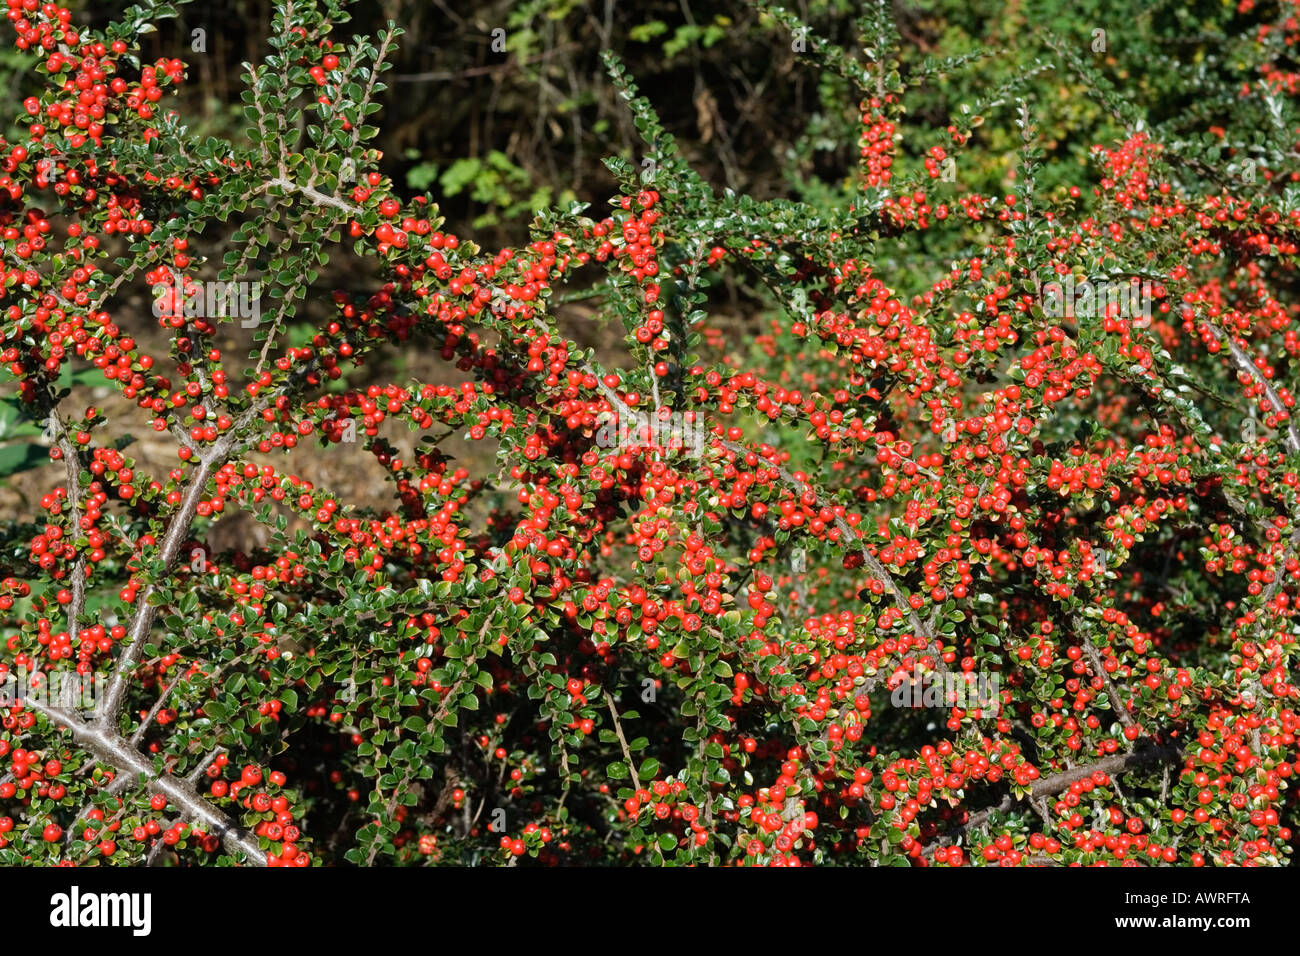 Landscaping Shrubs With Red Berries